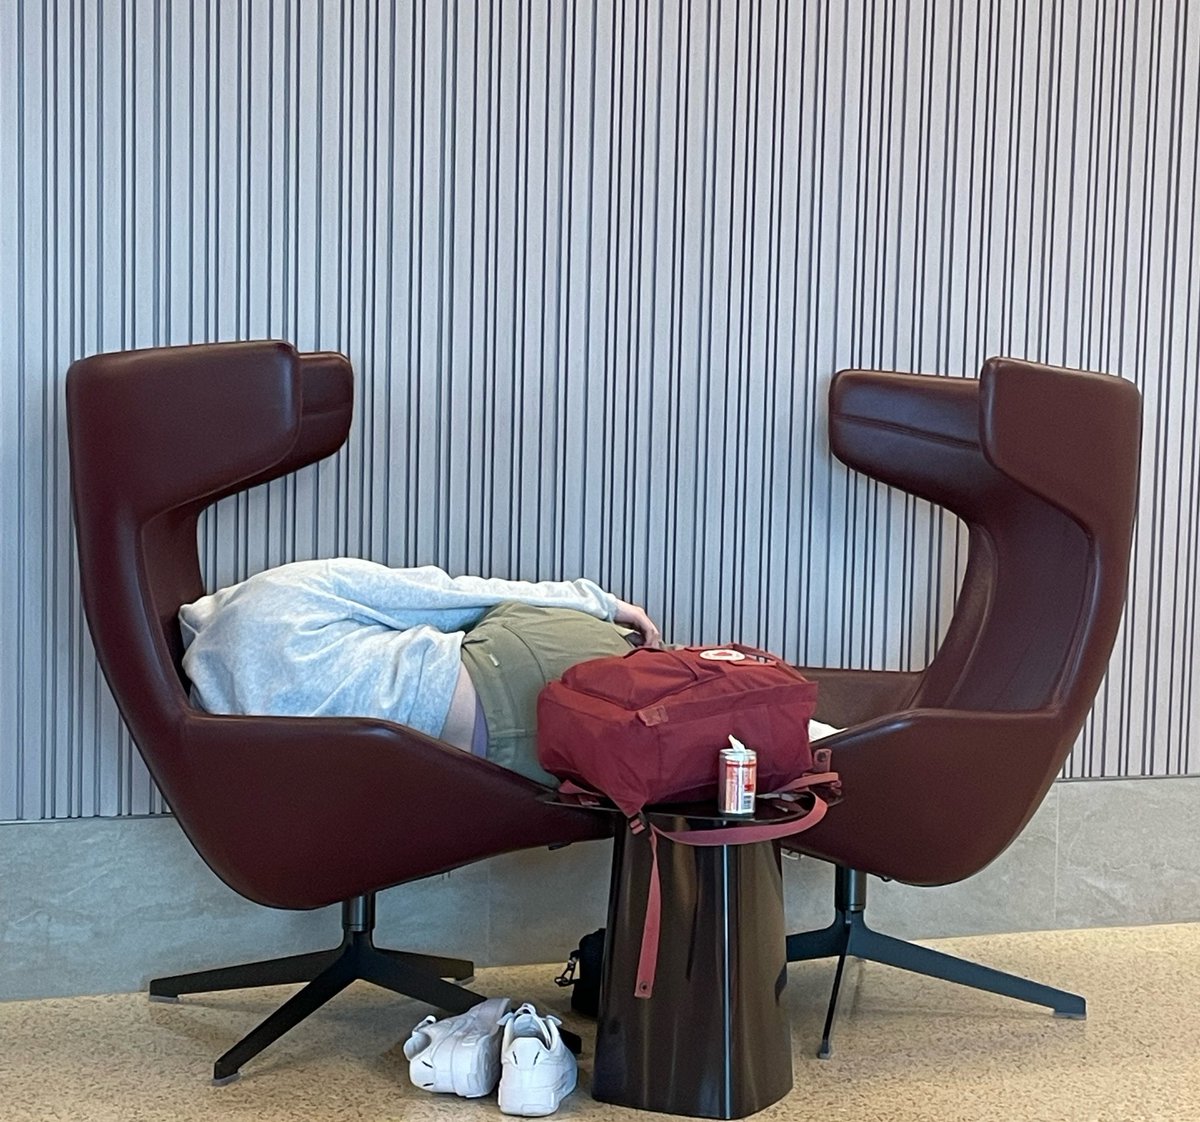 She was told to stop sleeping. Only 9 more hours left to go. Excellent customer service @British_Airways @qatarairways. @BBCNews why are you not reporting on this madness. @DohaAirport